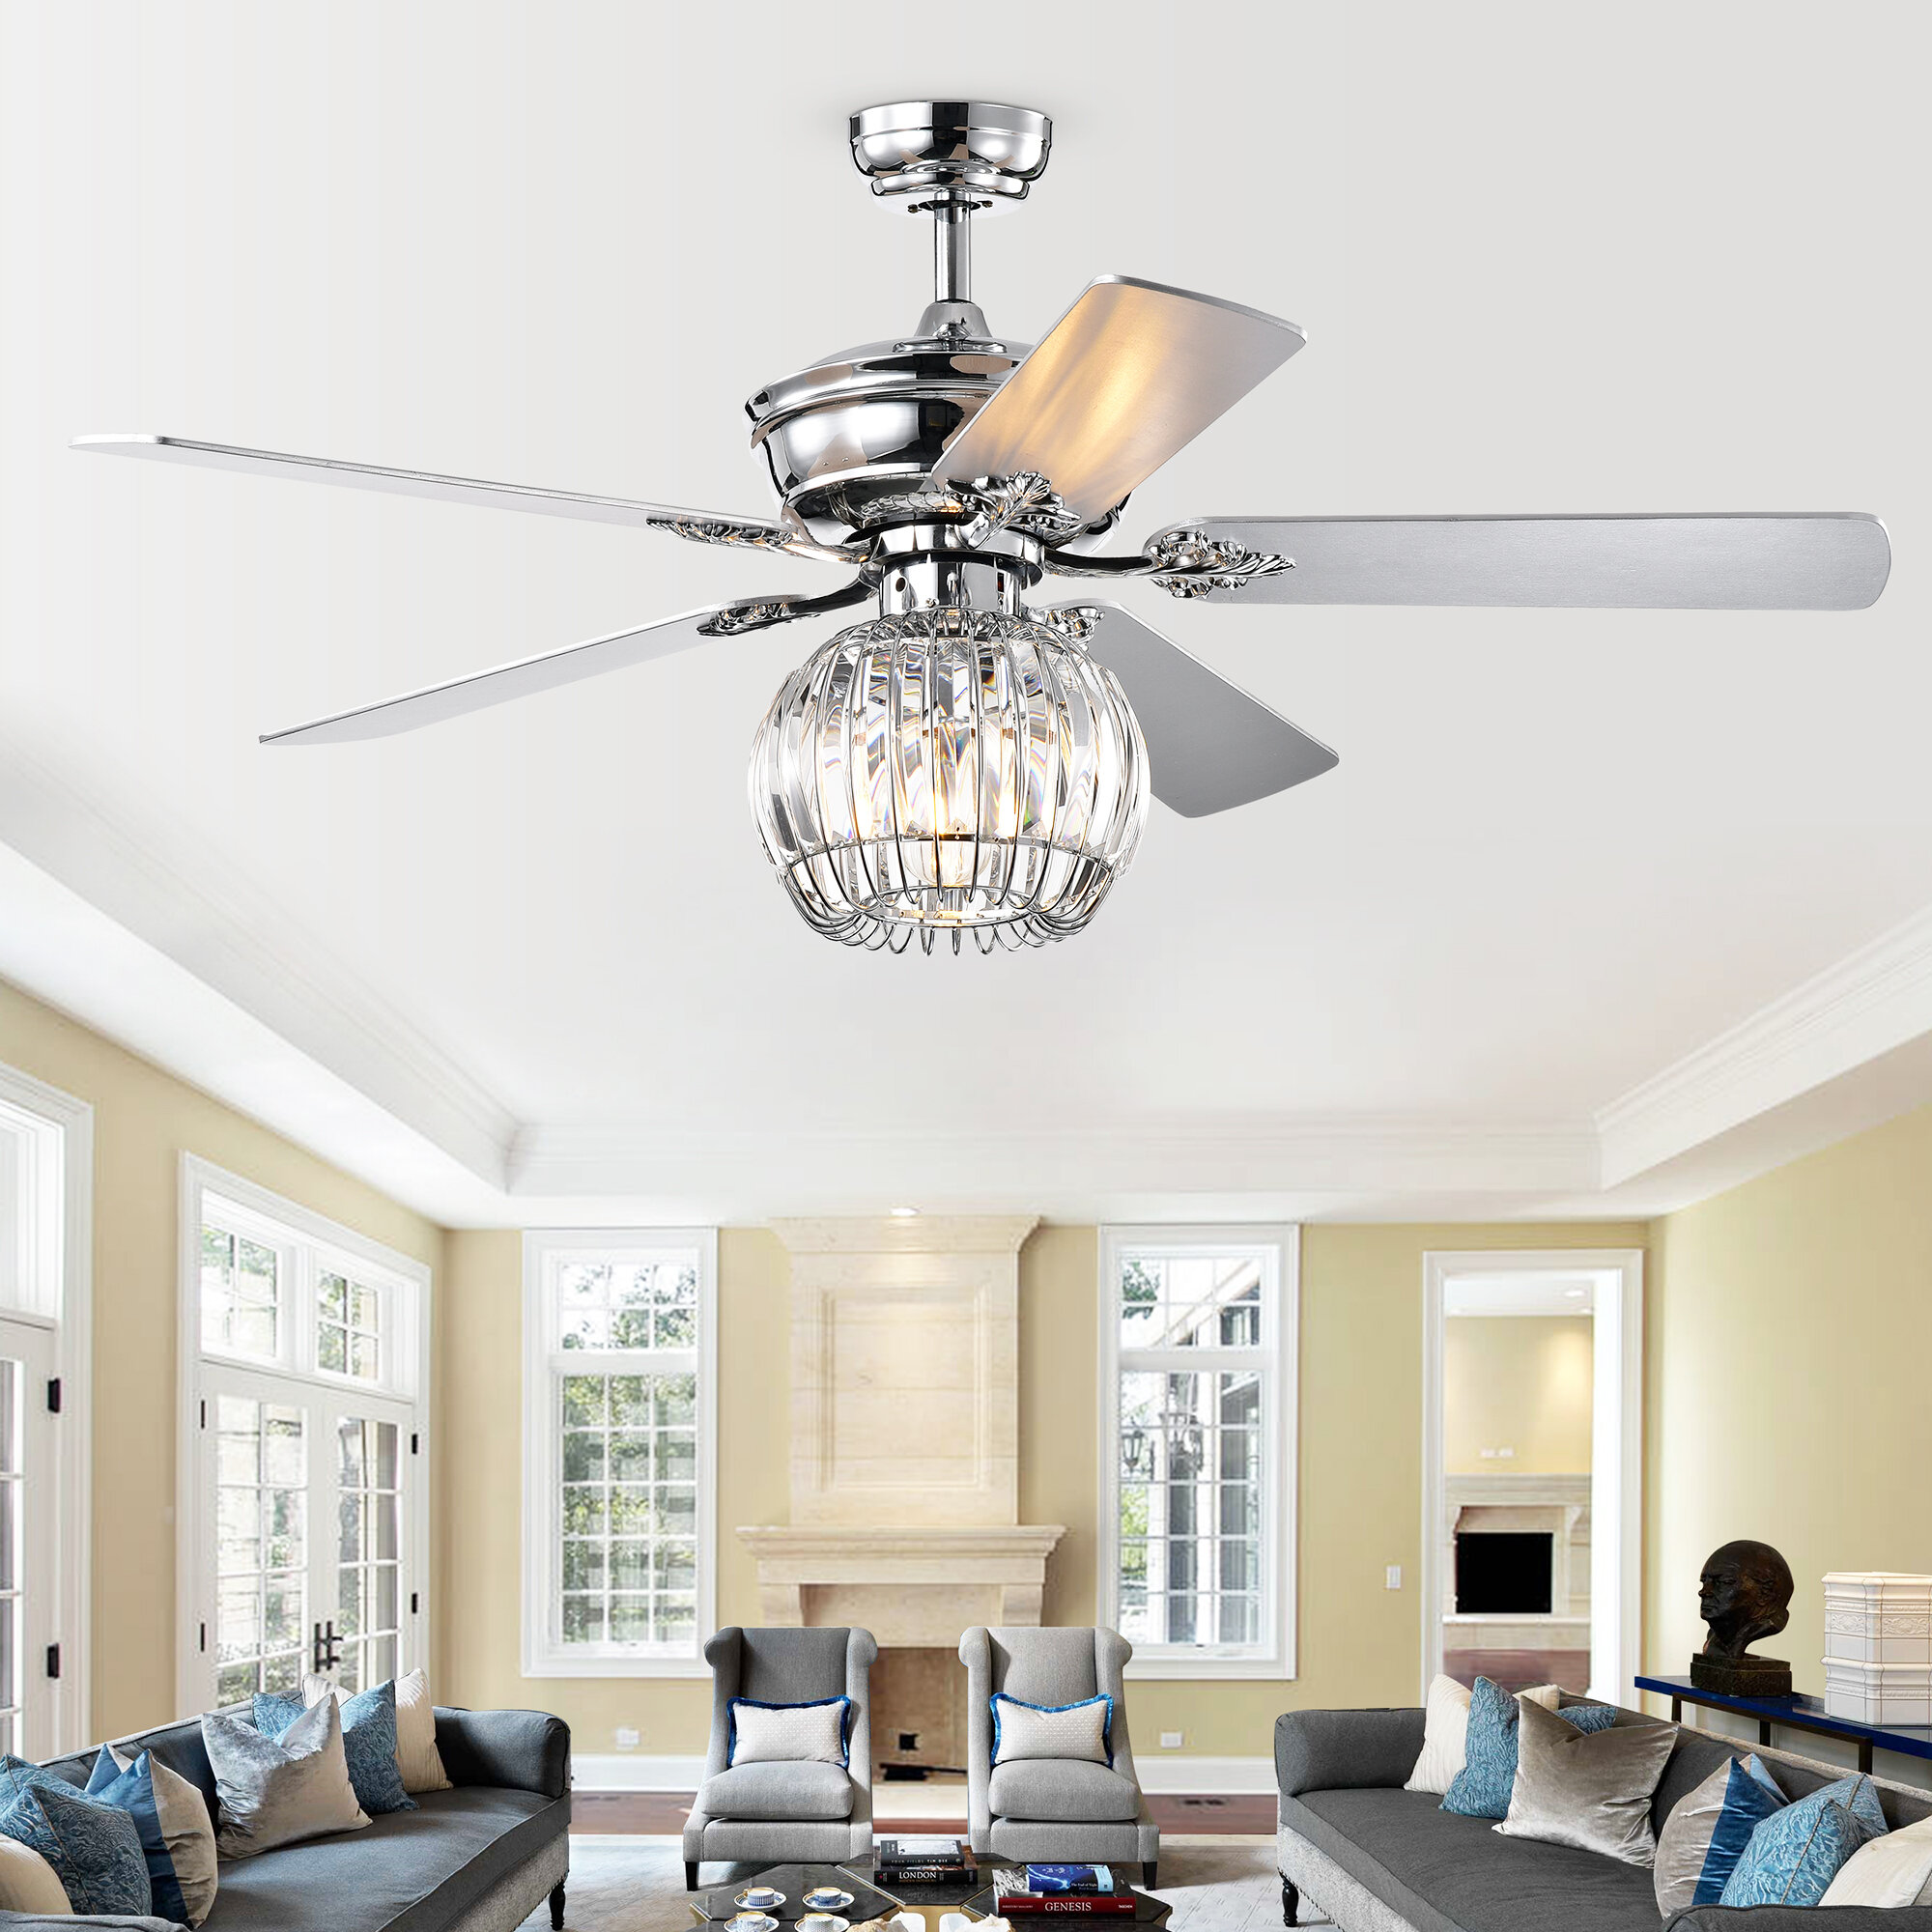 Pitman 5 Blade Lighted Ceiling Fan With Remote Light Kit Included